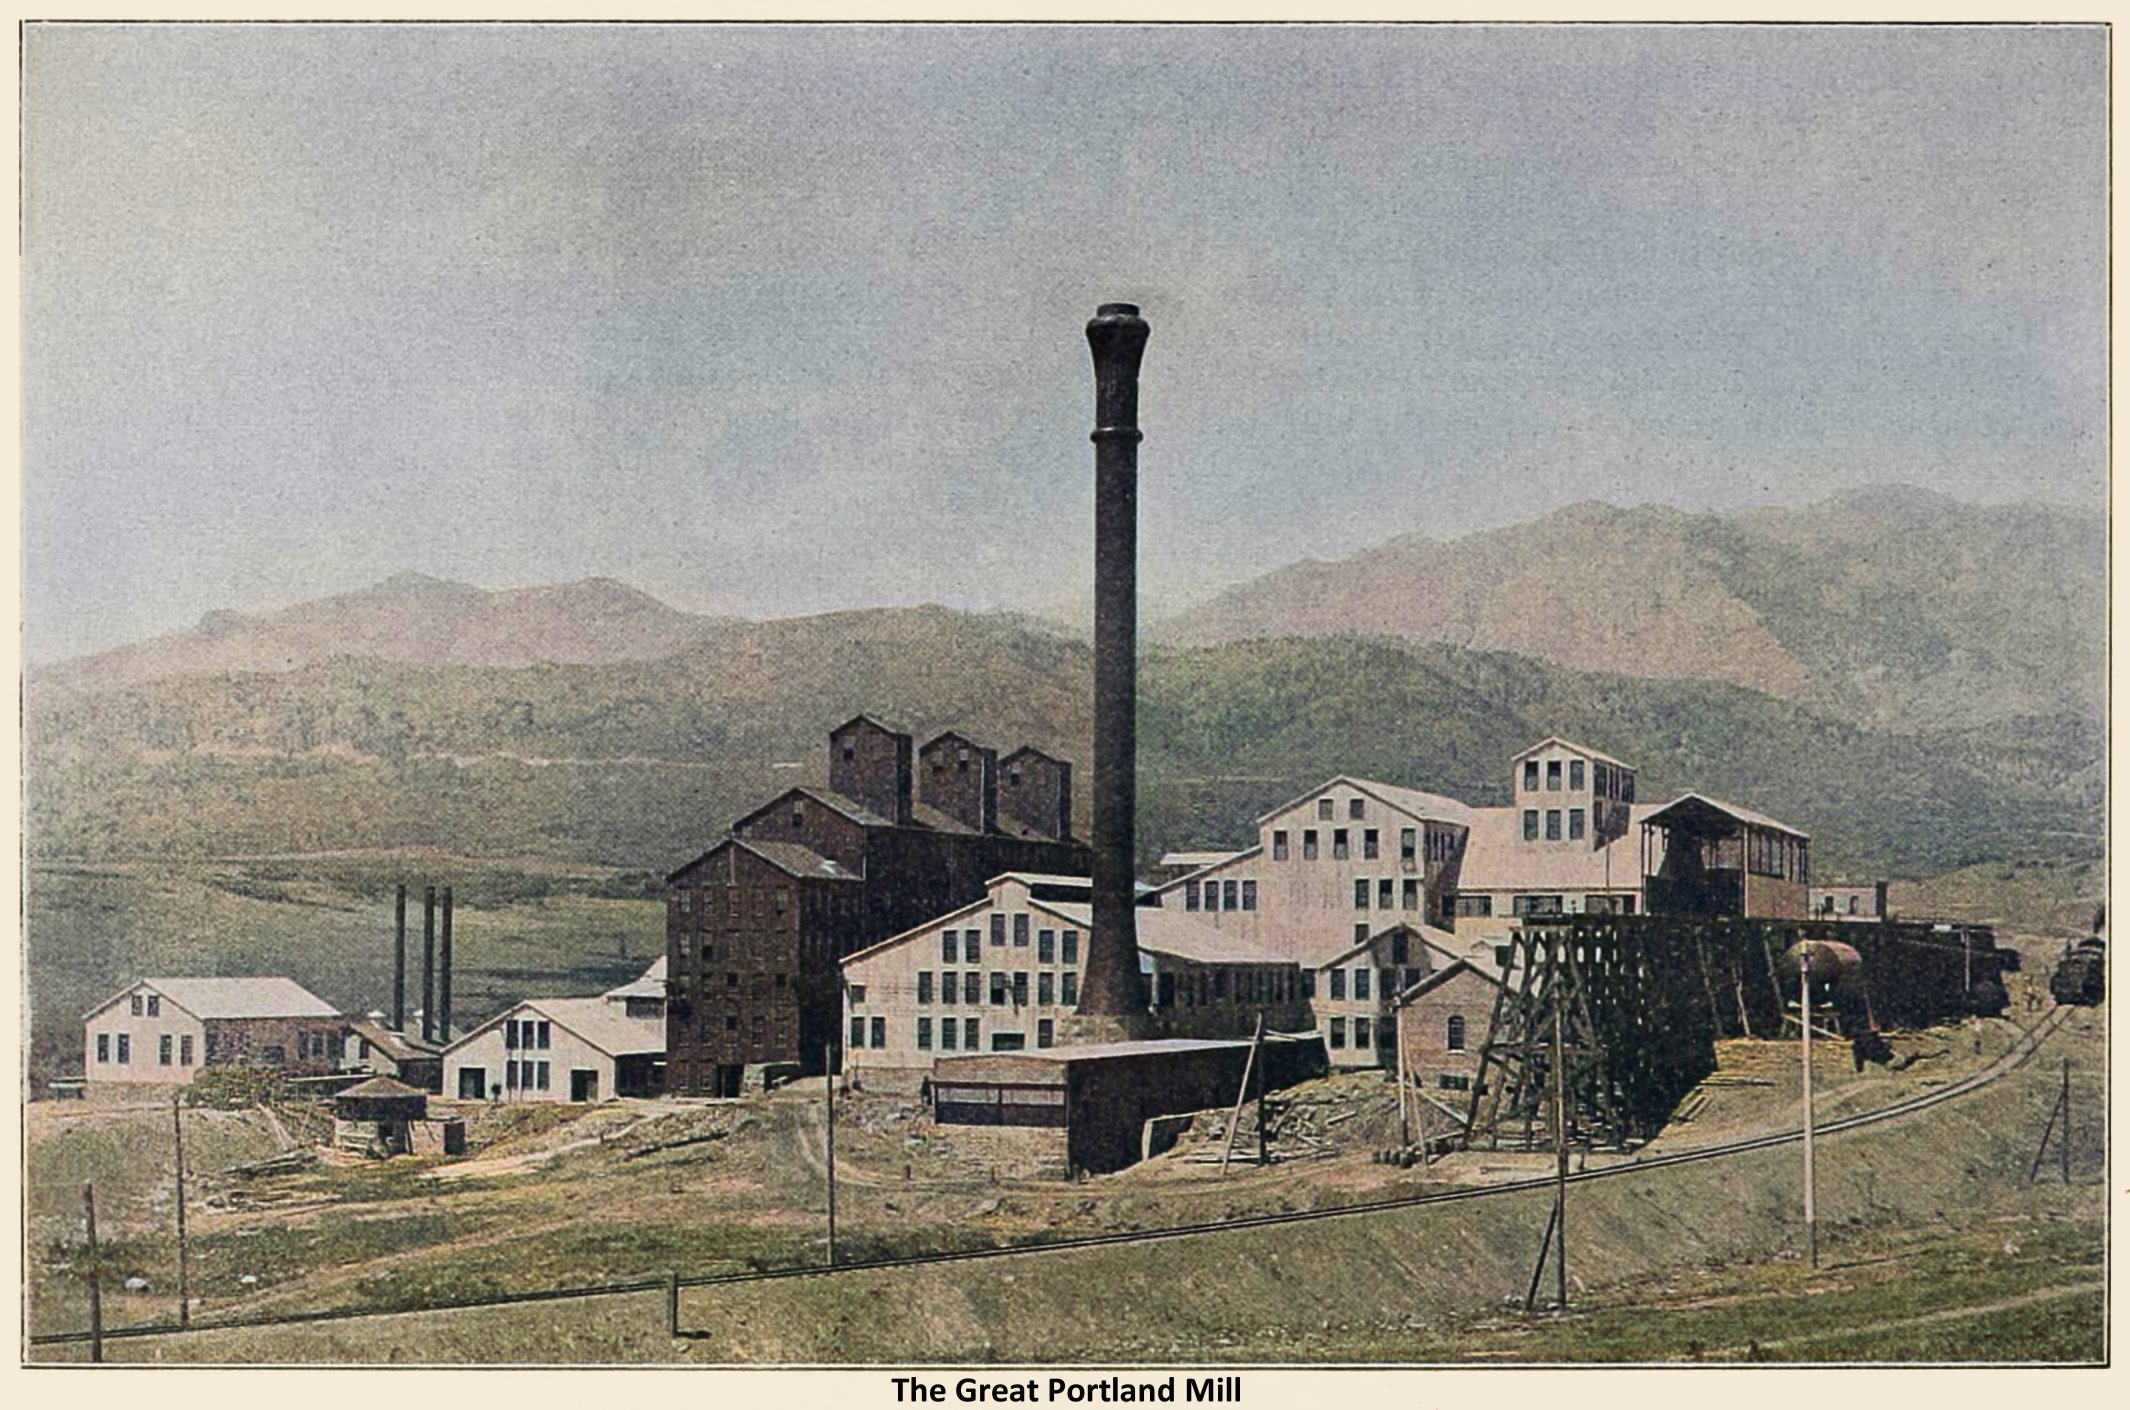 The Great Portland Mill